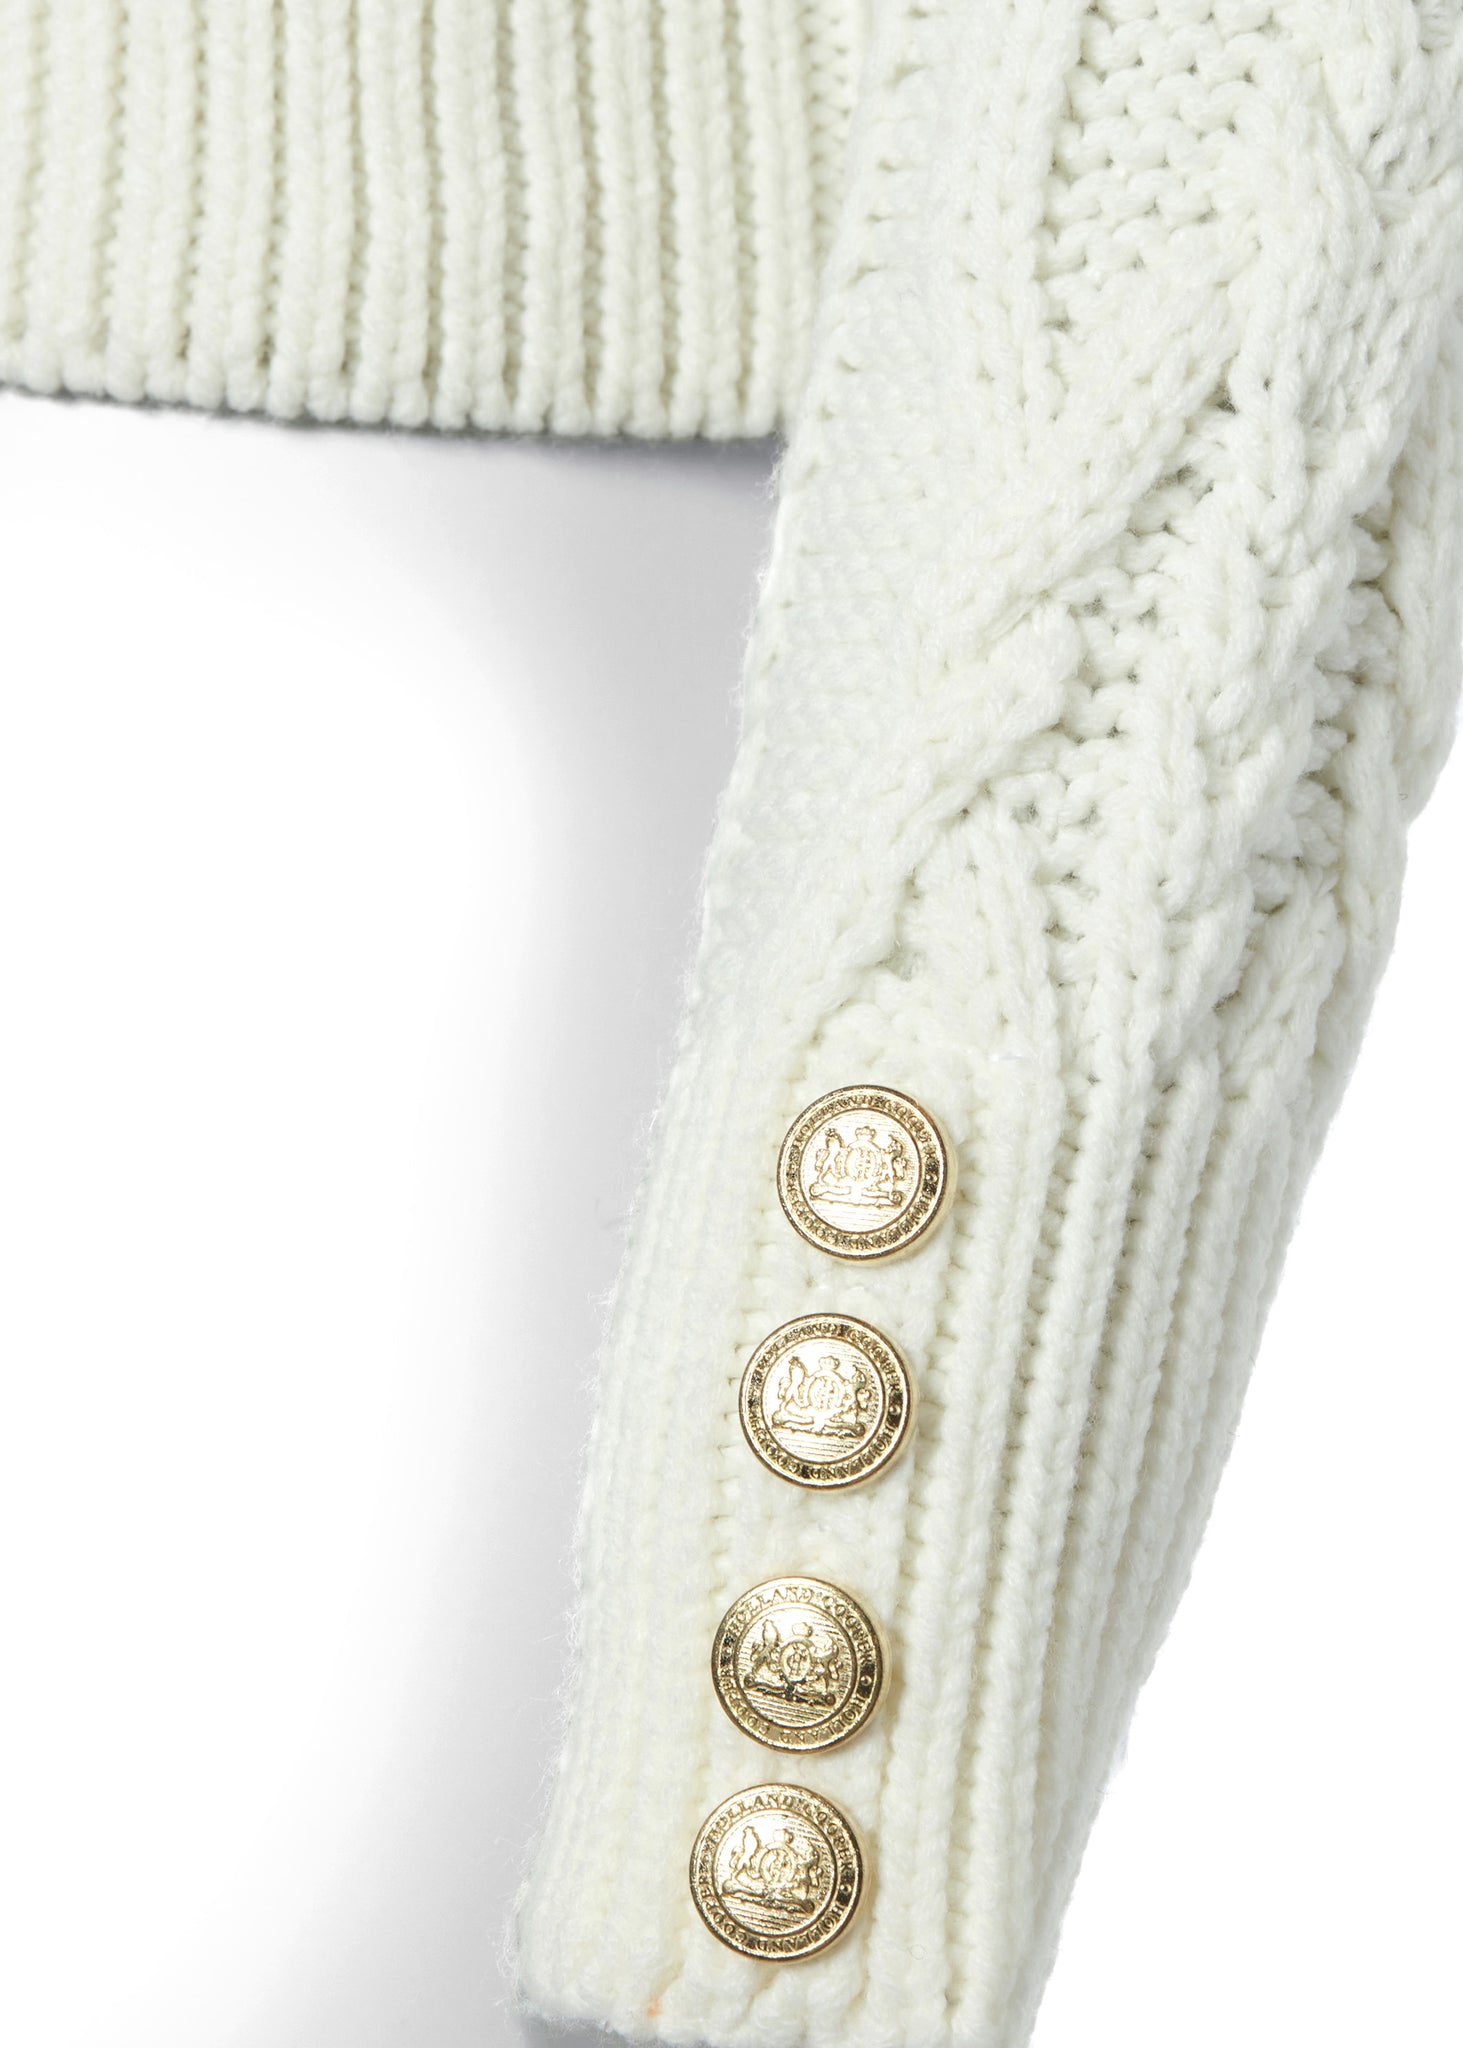 gold button detail on cuffs of a chunky cable knit roll neck jumper in cream with dropped shoulders and thick ribbed cable trims and gold buttons on cuffs and collar